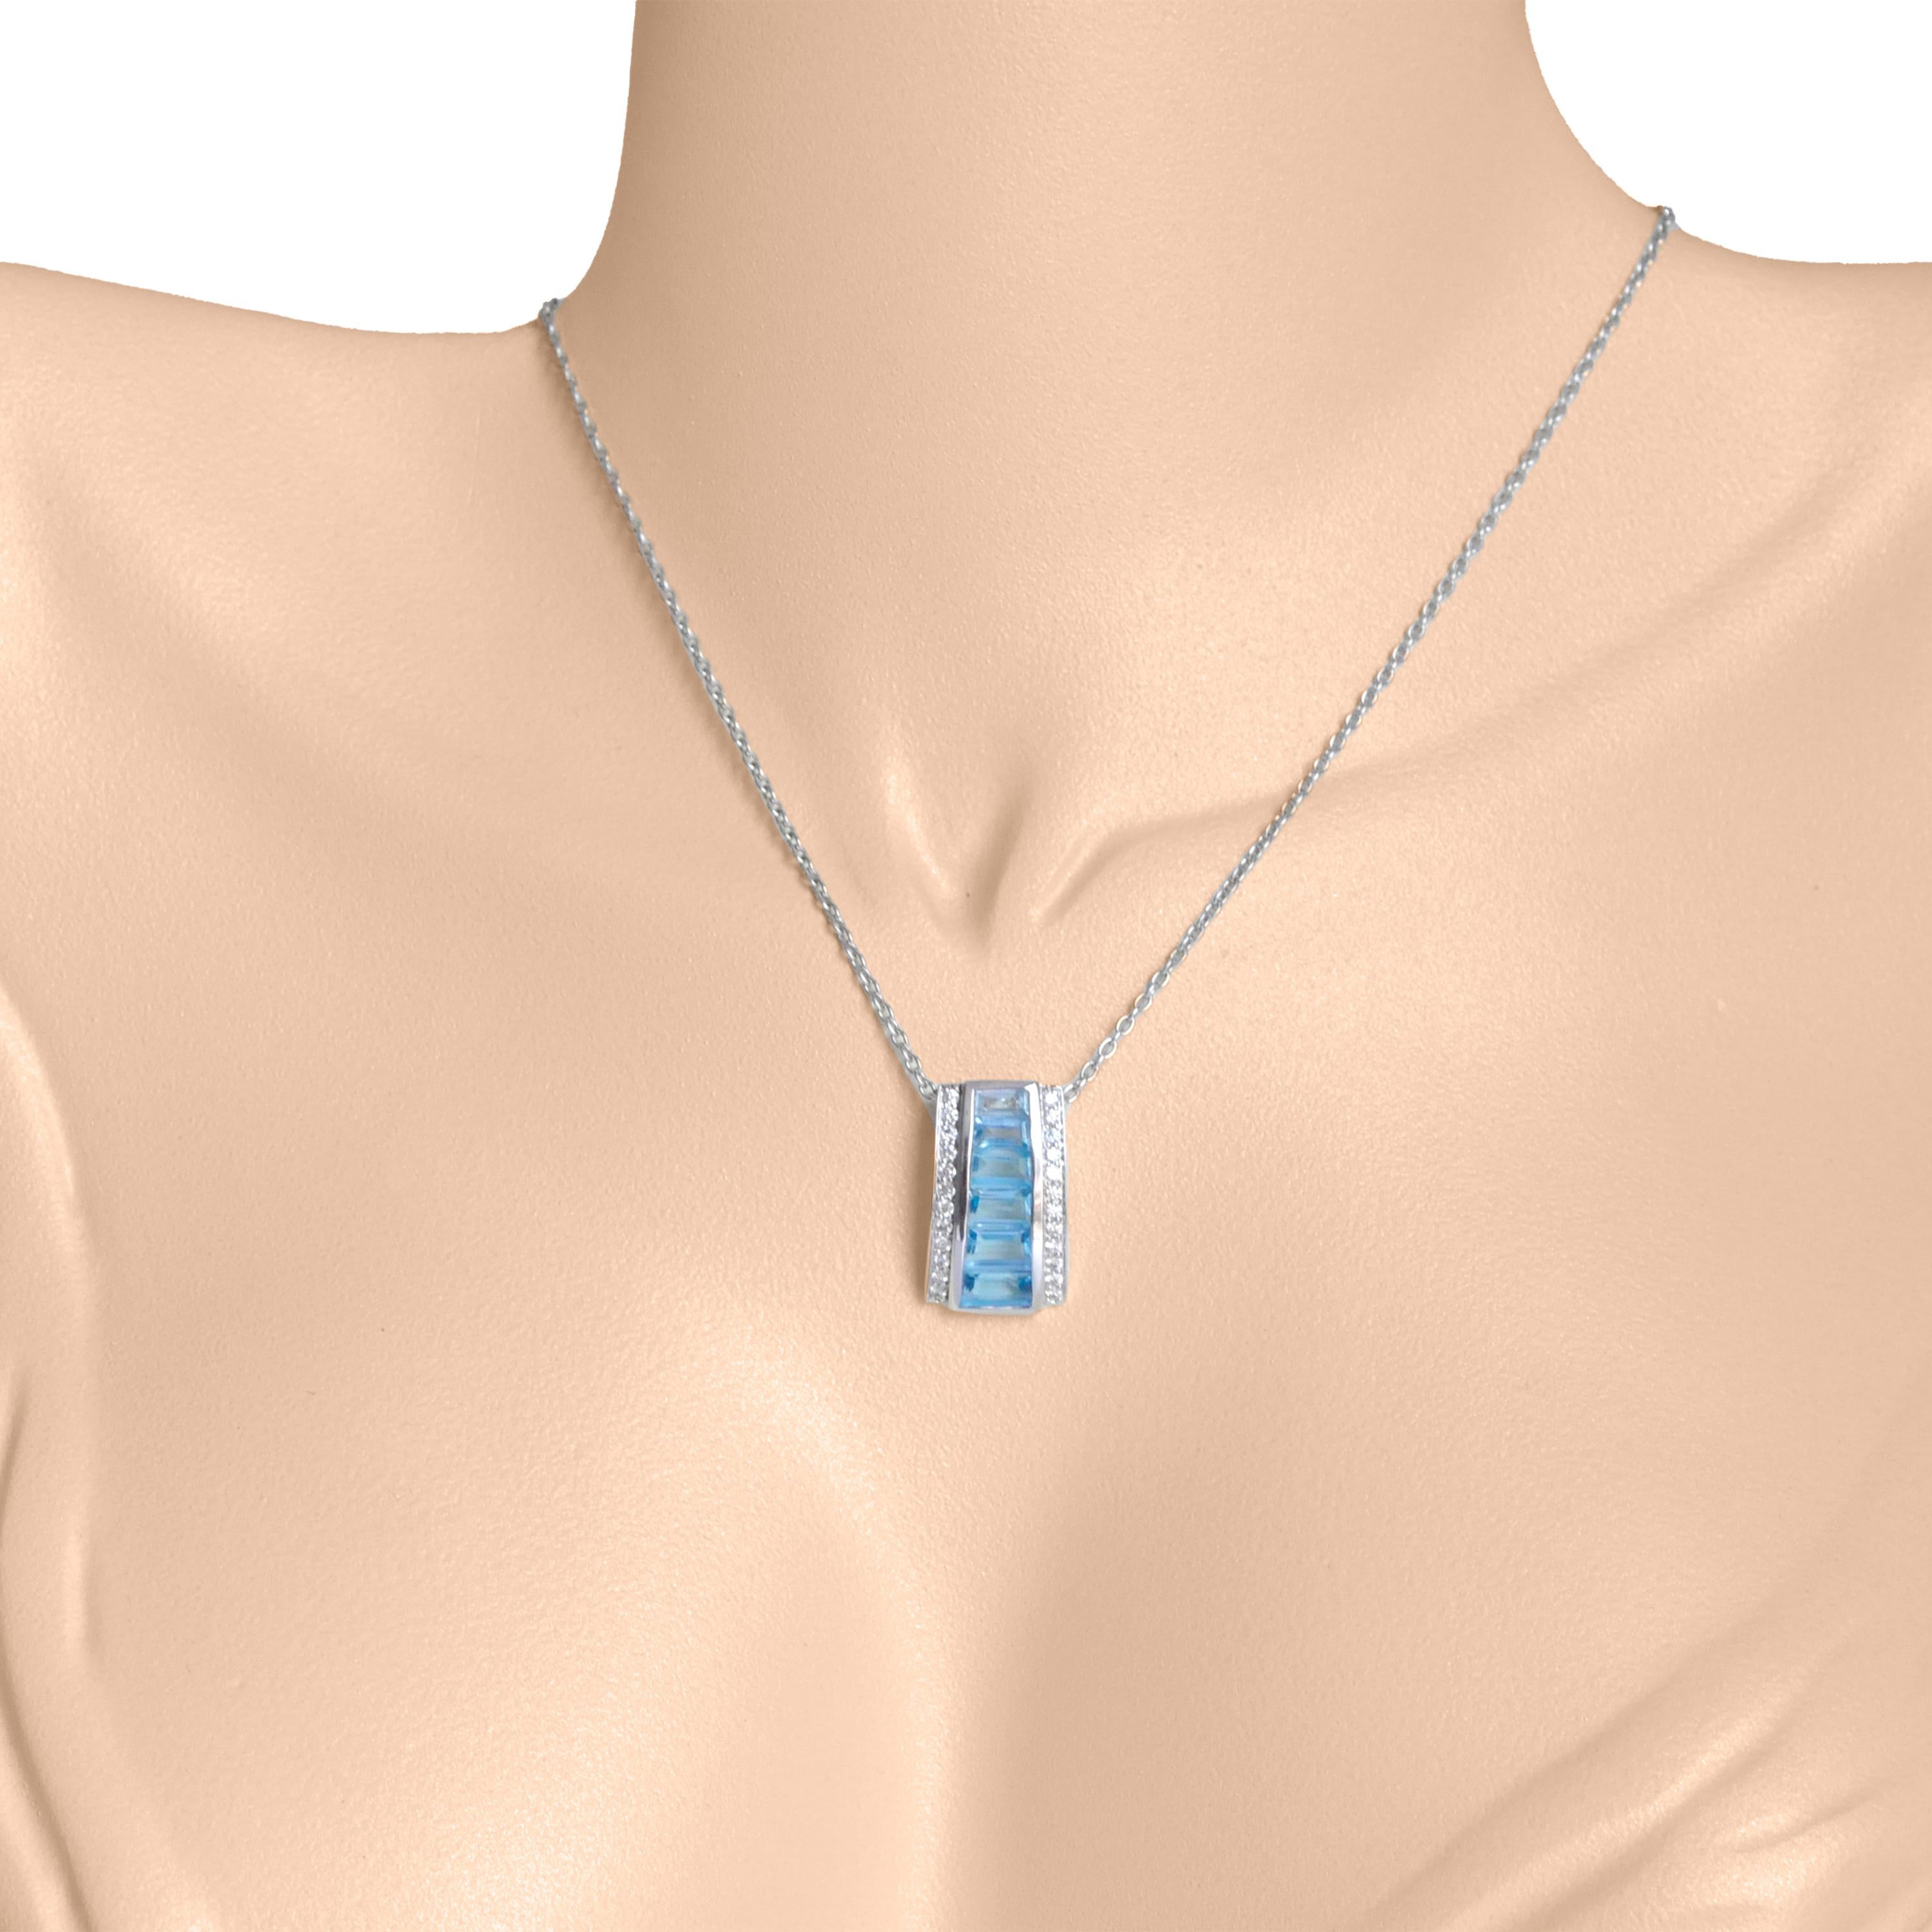 Introducing our exquisite 18K Gold Blue Topaz Pyramid Diamond Pendant Necklace, a captivating fusion of elegance and brilliance. This necklace showcases a stunning pyramid-shaped pendant adorned with a mesmerizing channel-set blue topaz gemstones